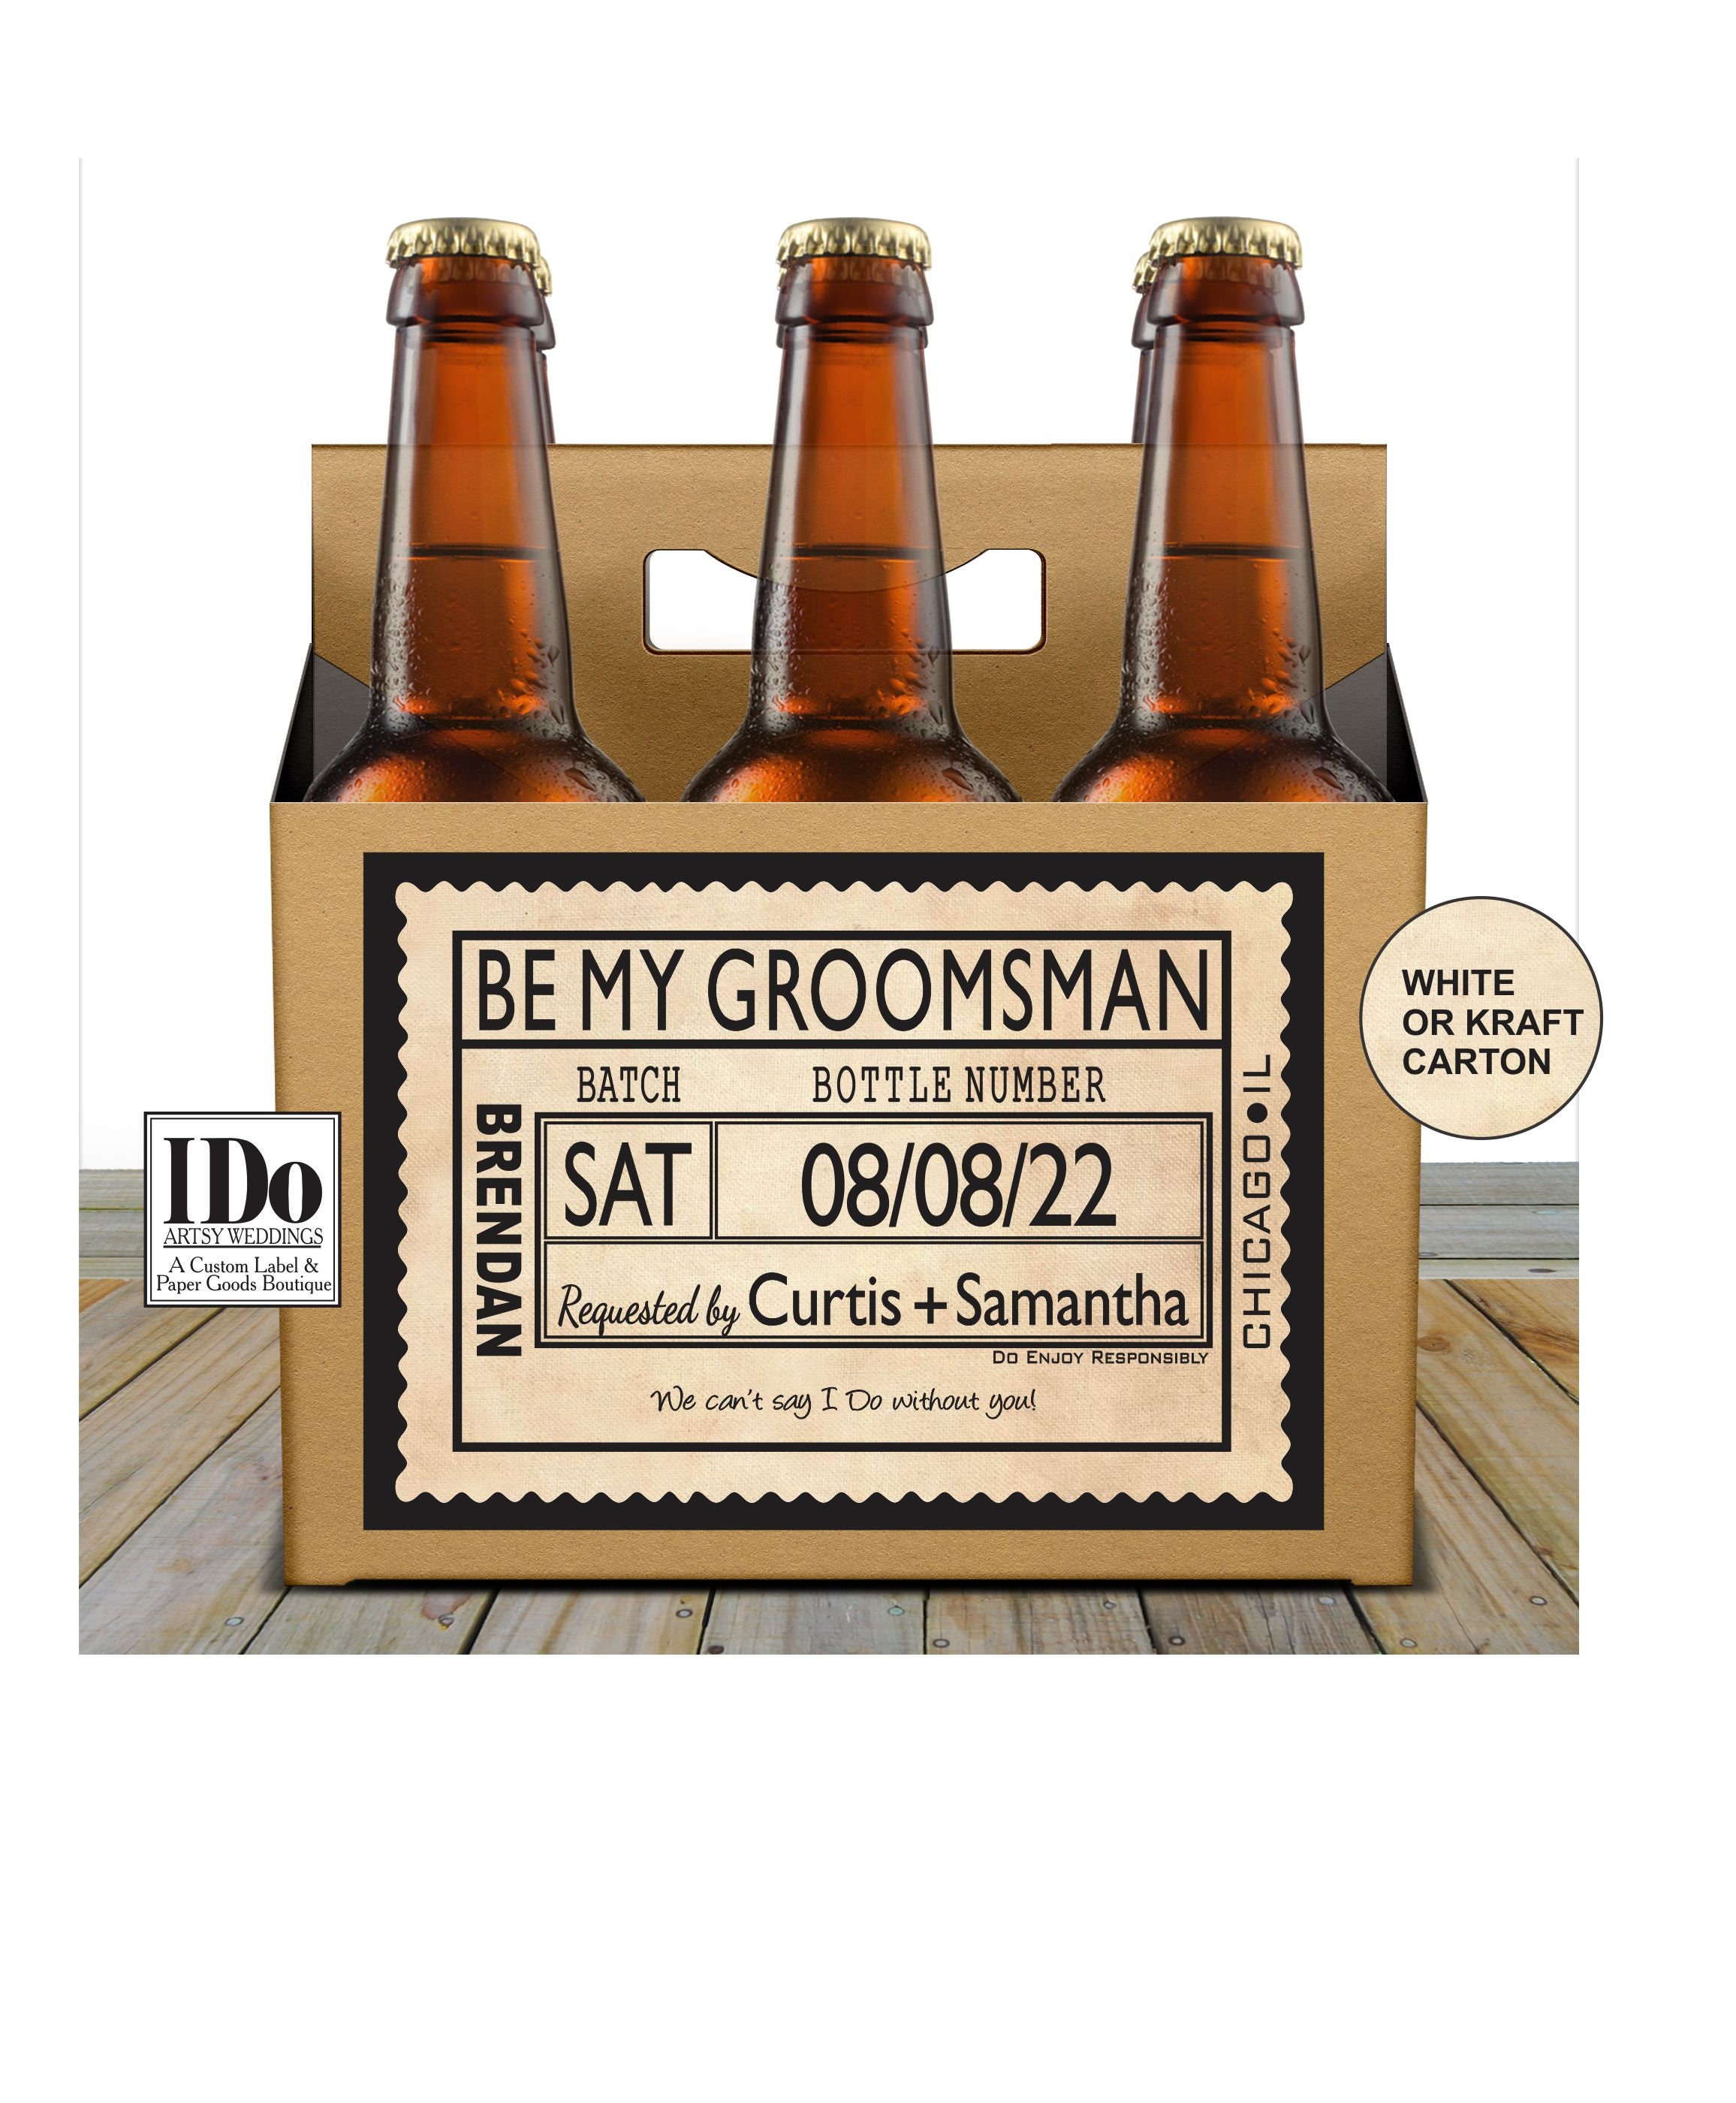 Will You Be My Groomsman Personalized Beer Bottle Labels 